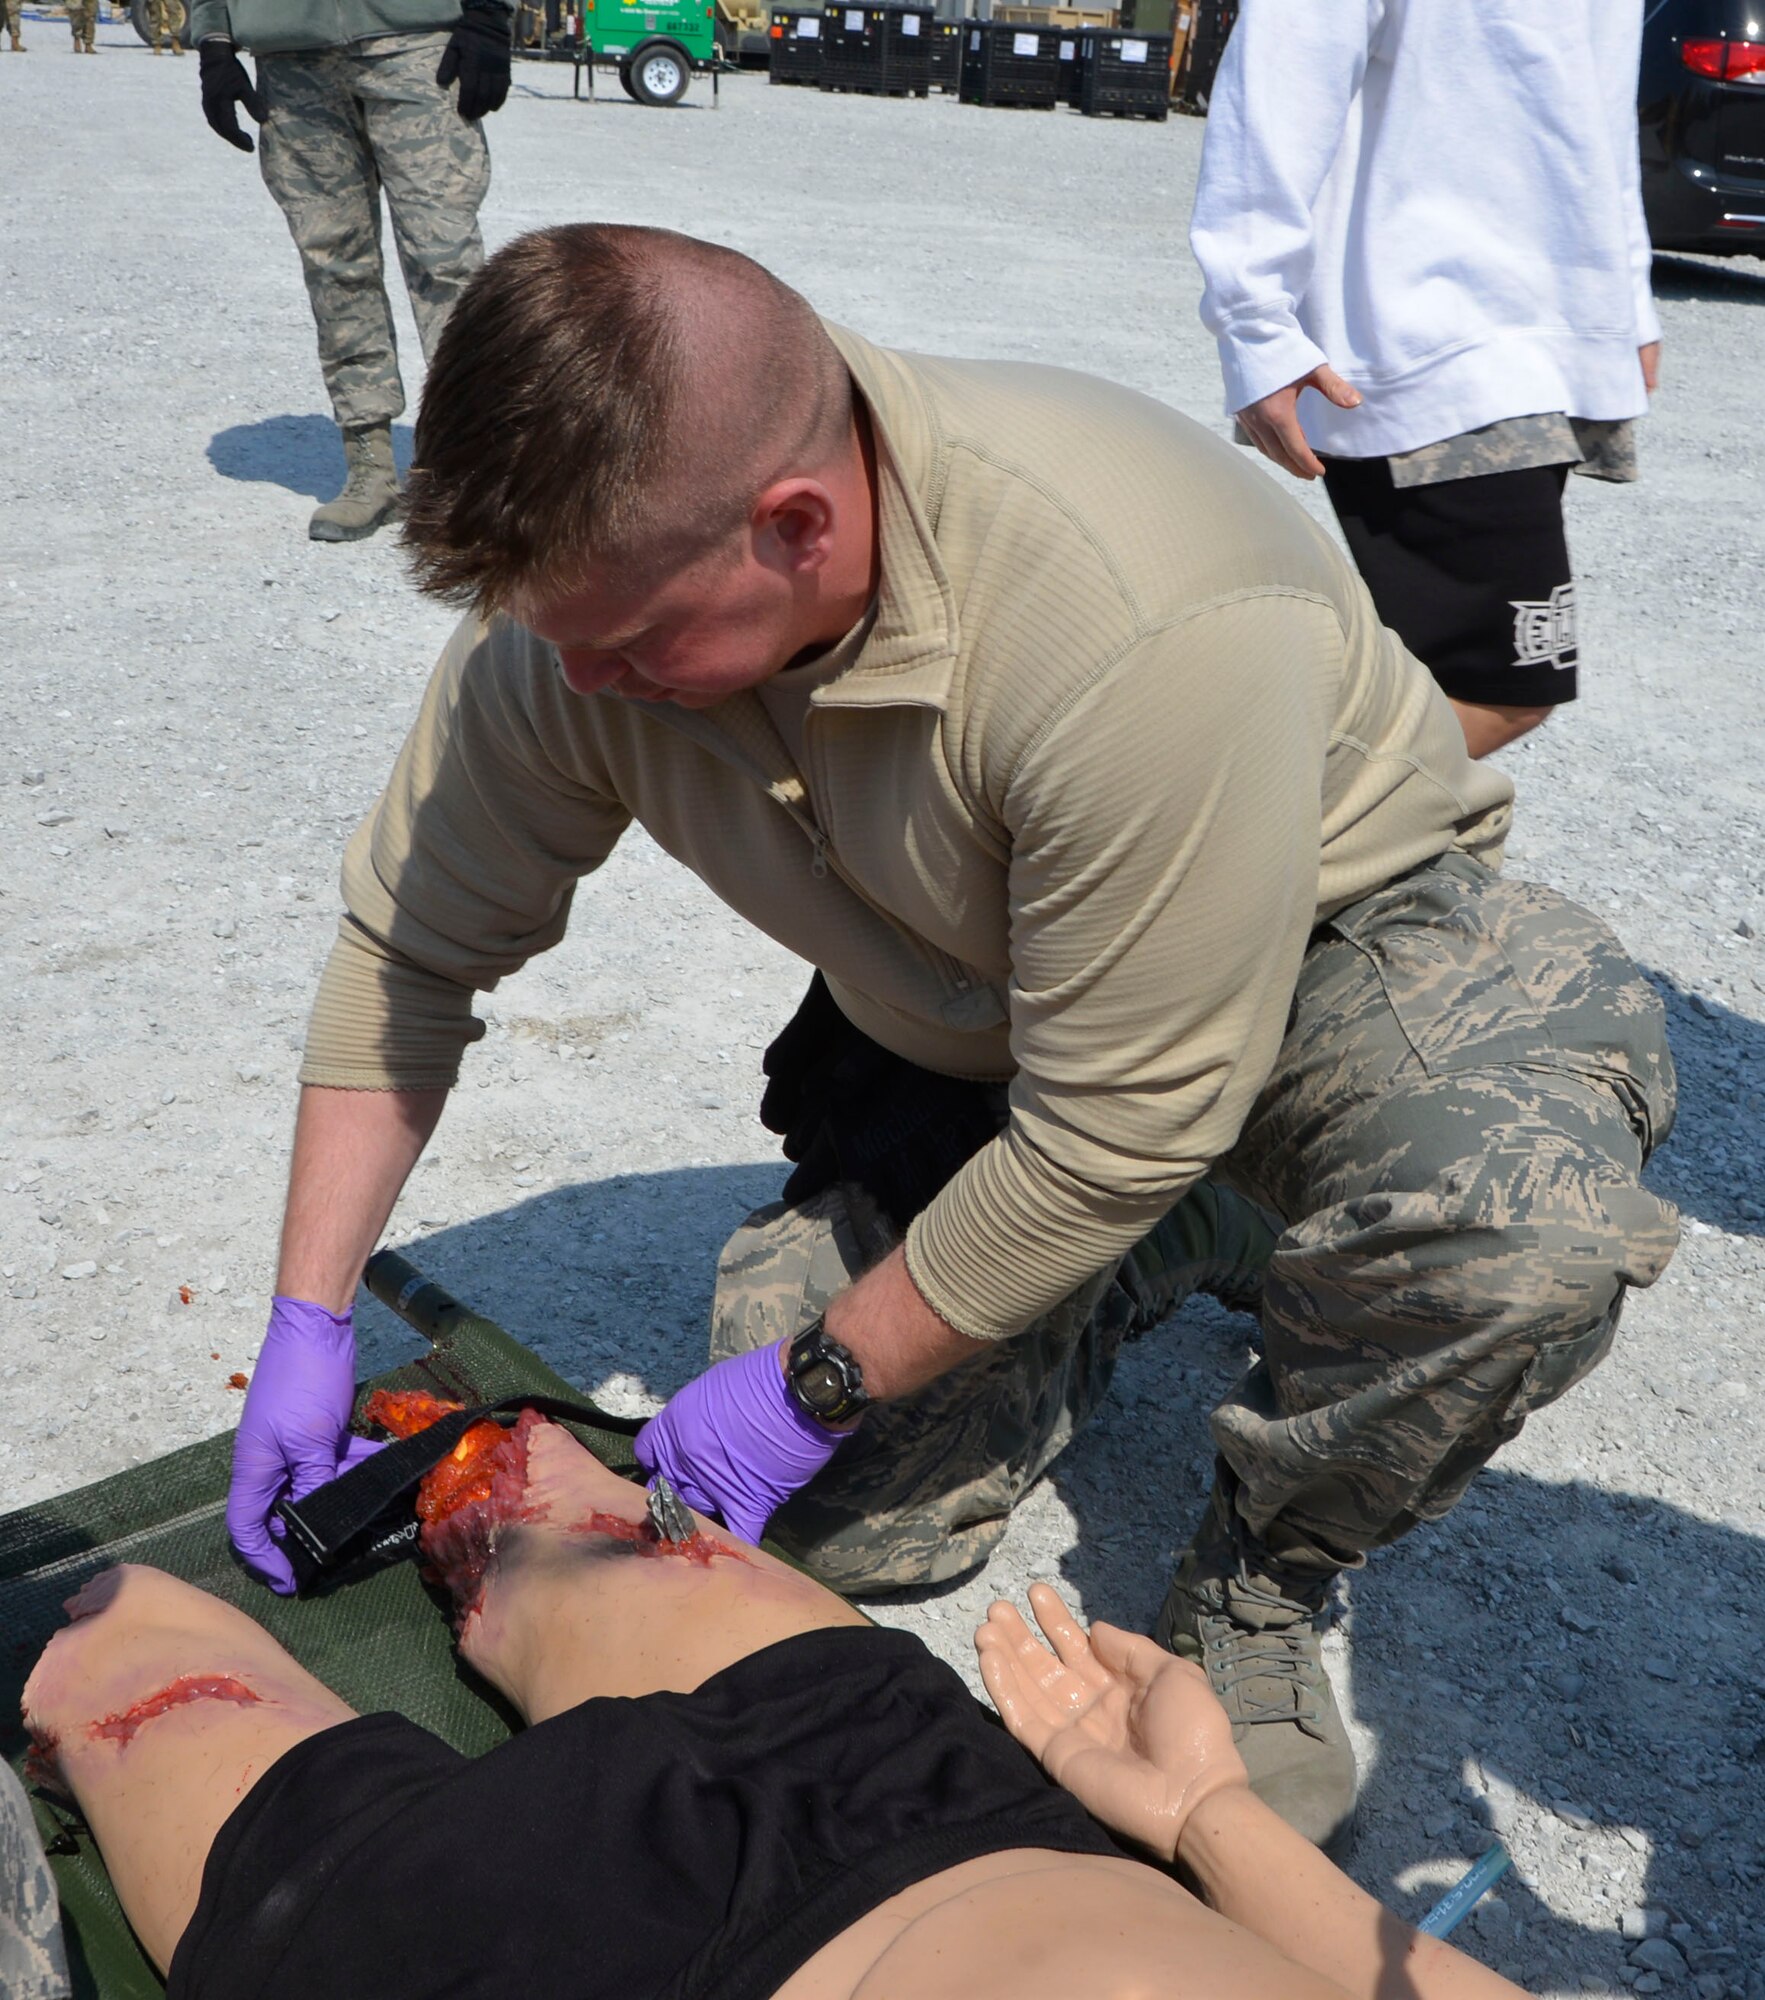 Senior Airman Glen Snyder, 81st Medical Group medic, Keesler Air Force Base, Miss., applies a tourniquet to a simulated  “resident” injured in the natural disaster tornado scenario during the Expeditionary Medical Support field confirmation exercise here April 18. The confirmation exercise is evaluating the tactics, techniques and procedures of EMEDS operations during a domestic U.S. contingency such as a natural disaster. (Air Force photo by Mary McHale)